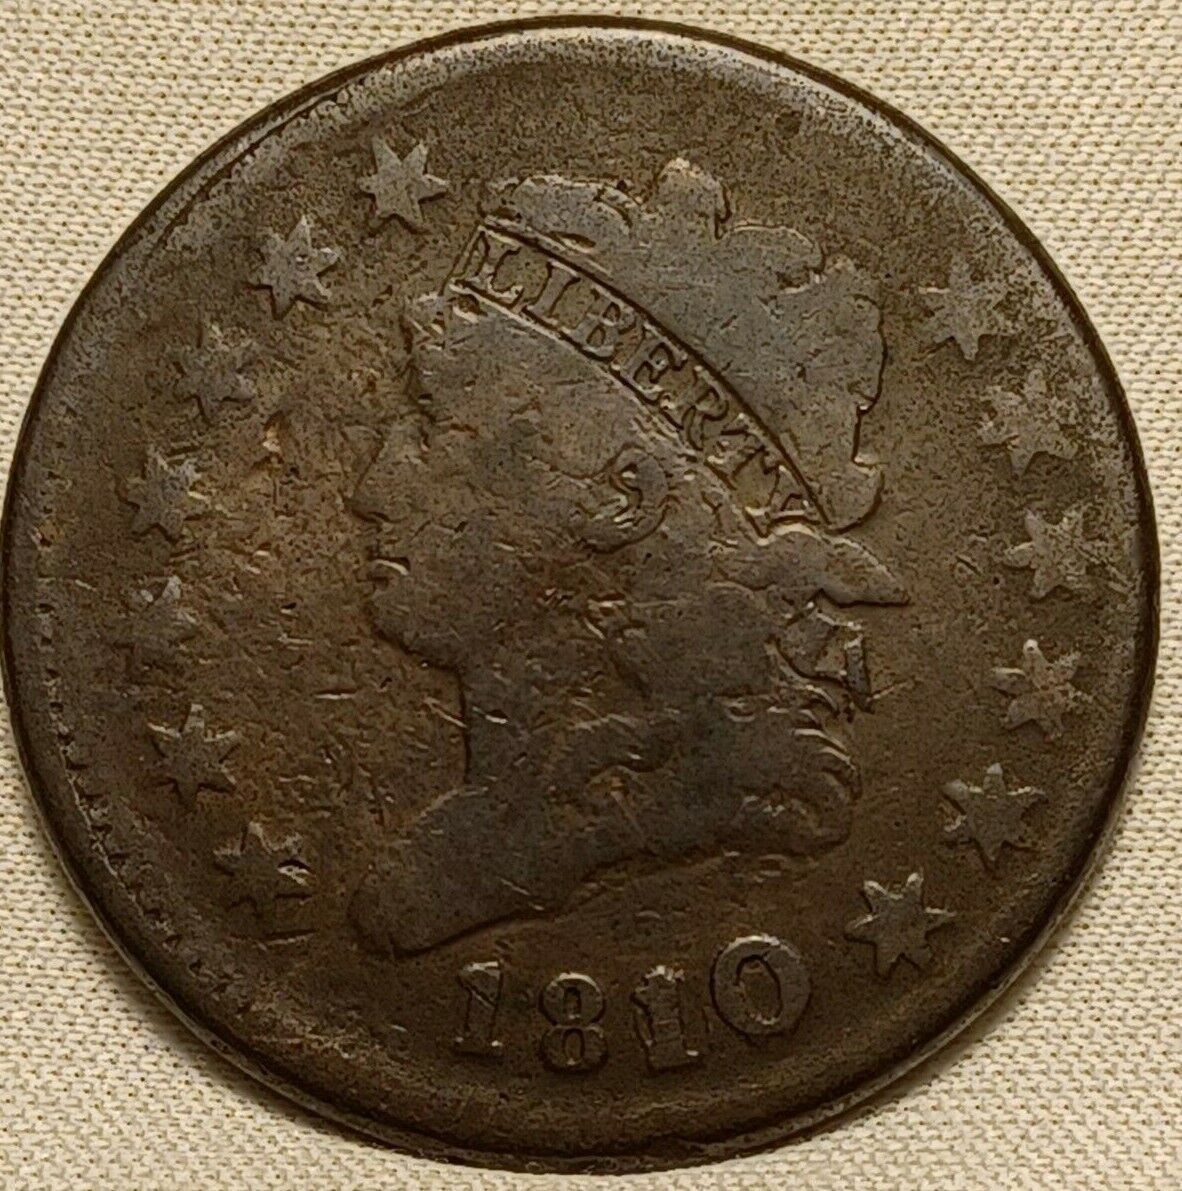 1810/9 Classic Head Large Cent. S-281 Overdate 10 Over 09!